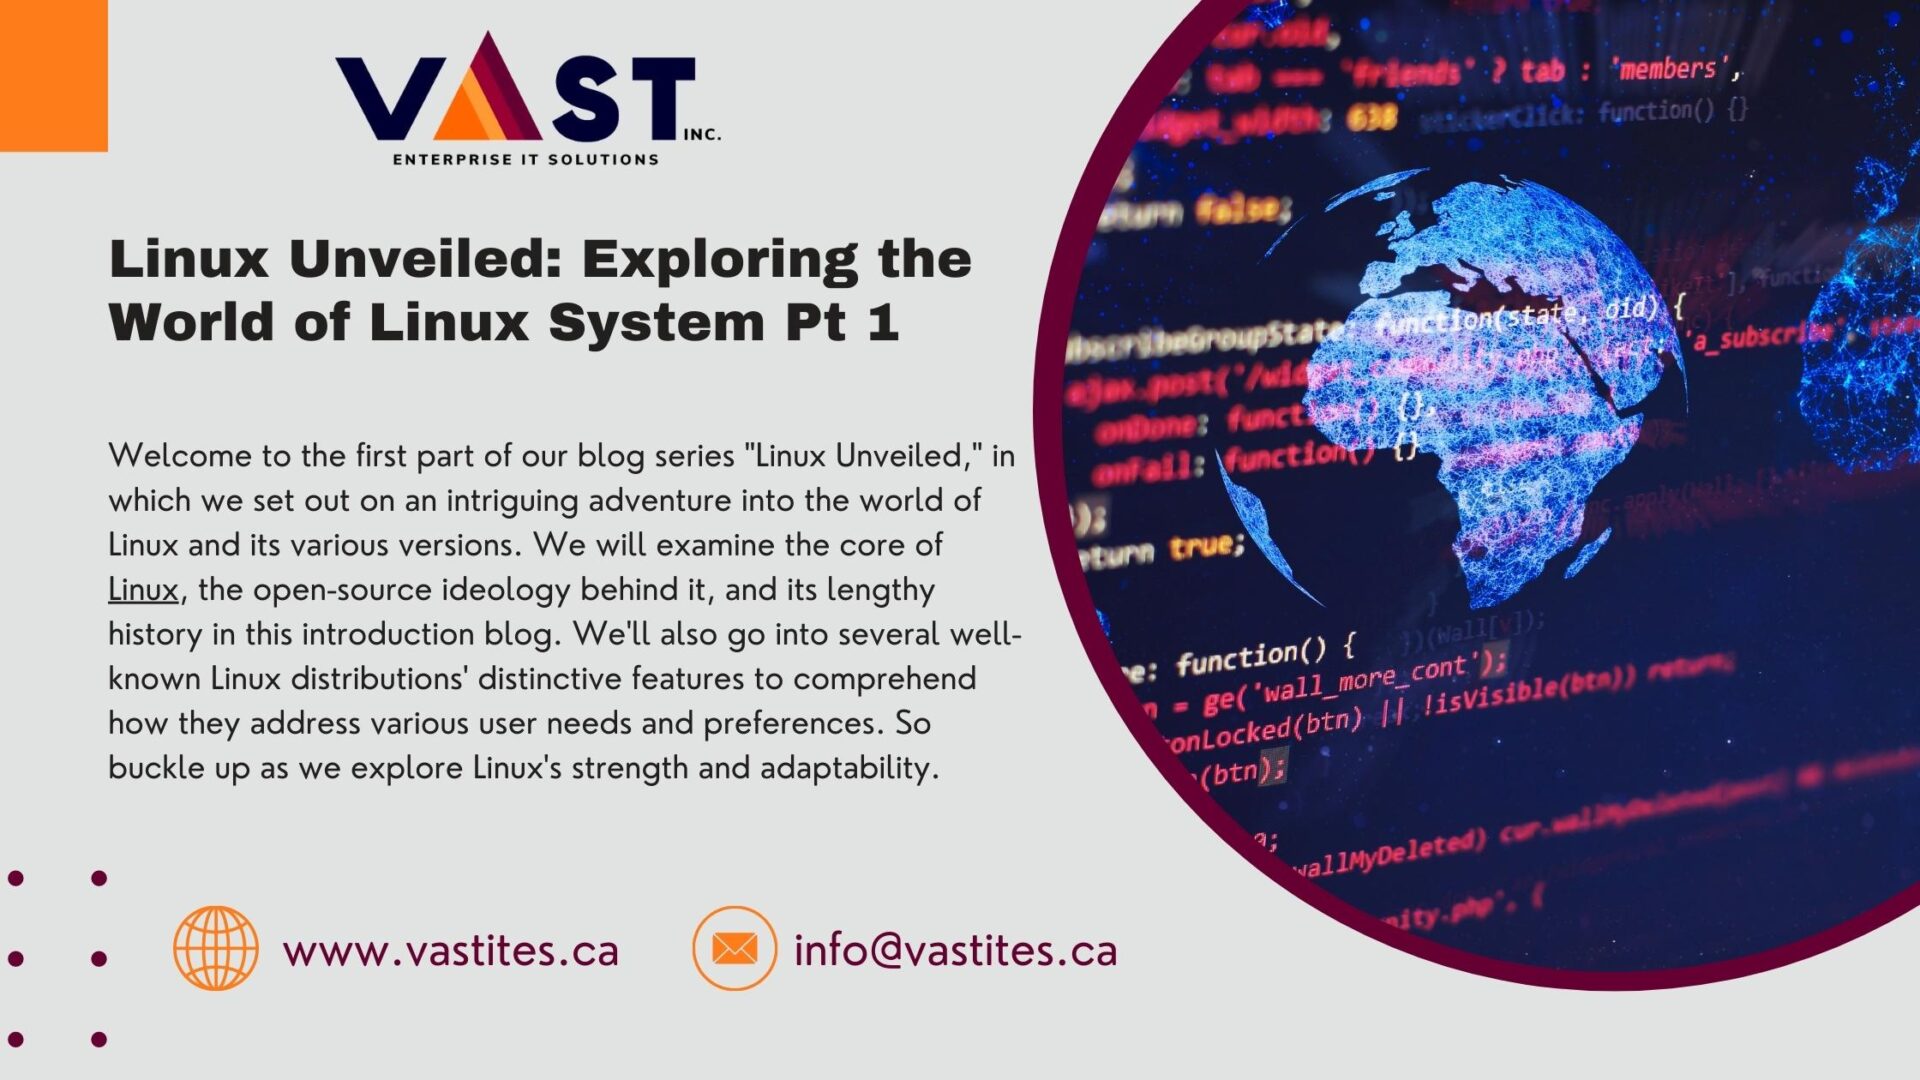 Linux-Unveiled-Exploring-the-World-of-Linux-System-Pt-1-VaST-ITES-INC